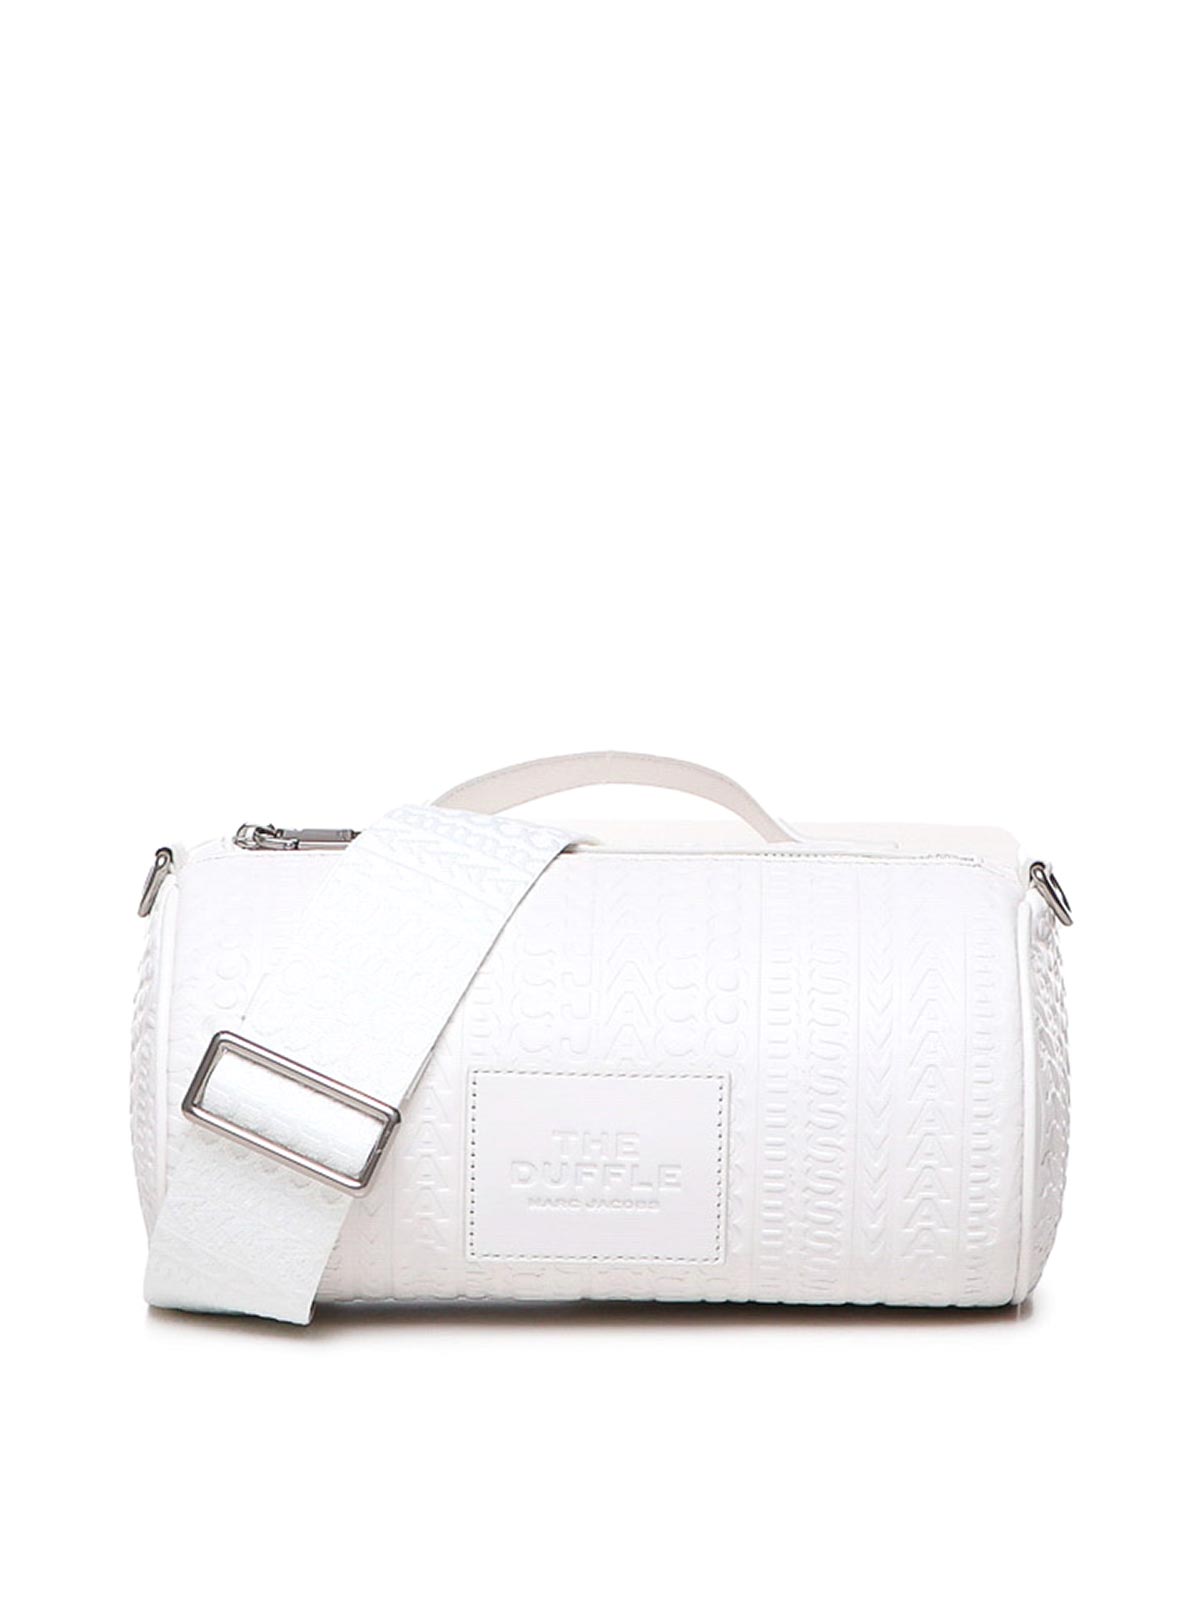 Marc Jacobs The Monogram Bag In White